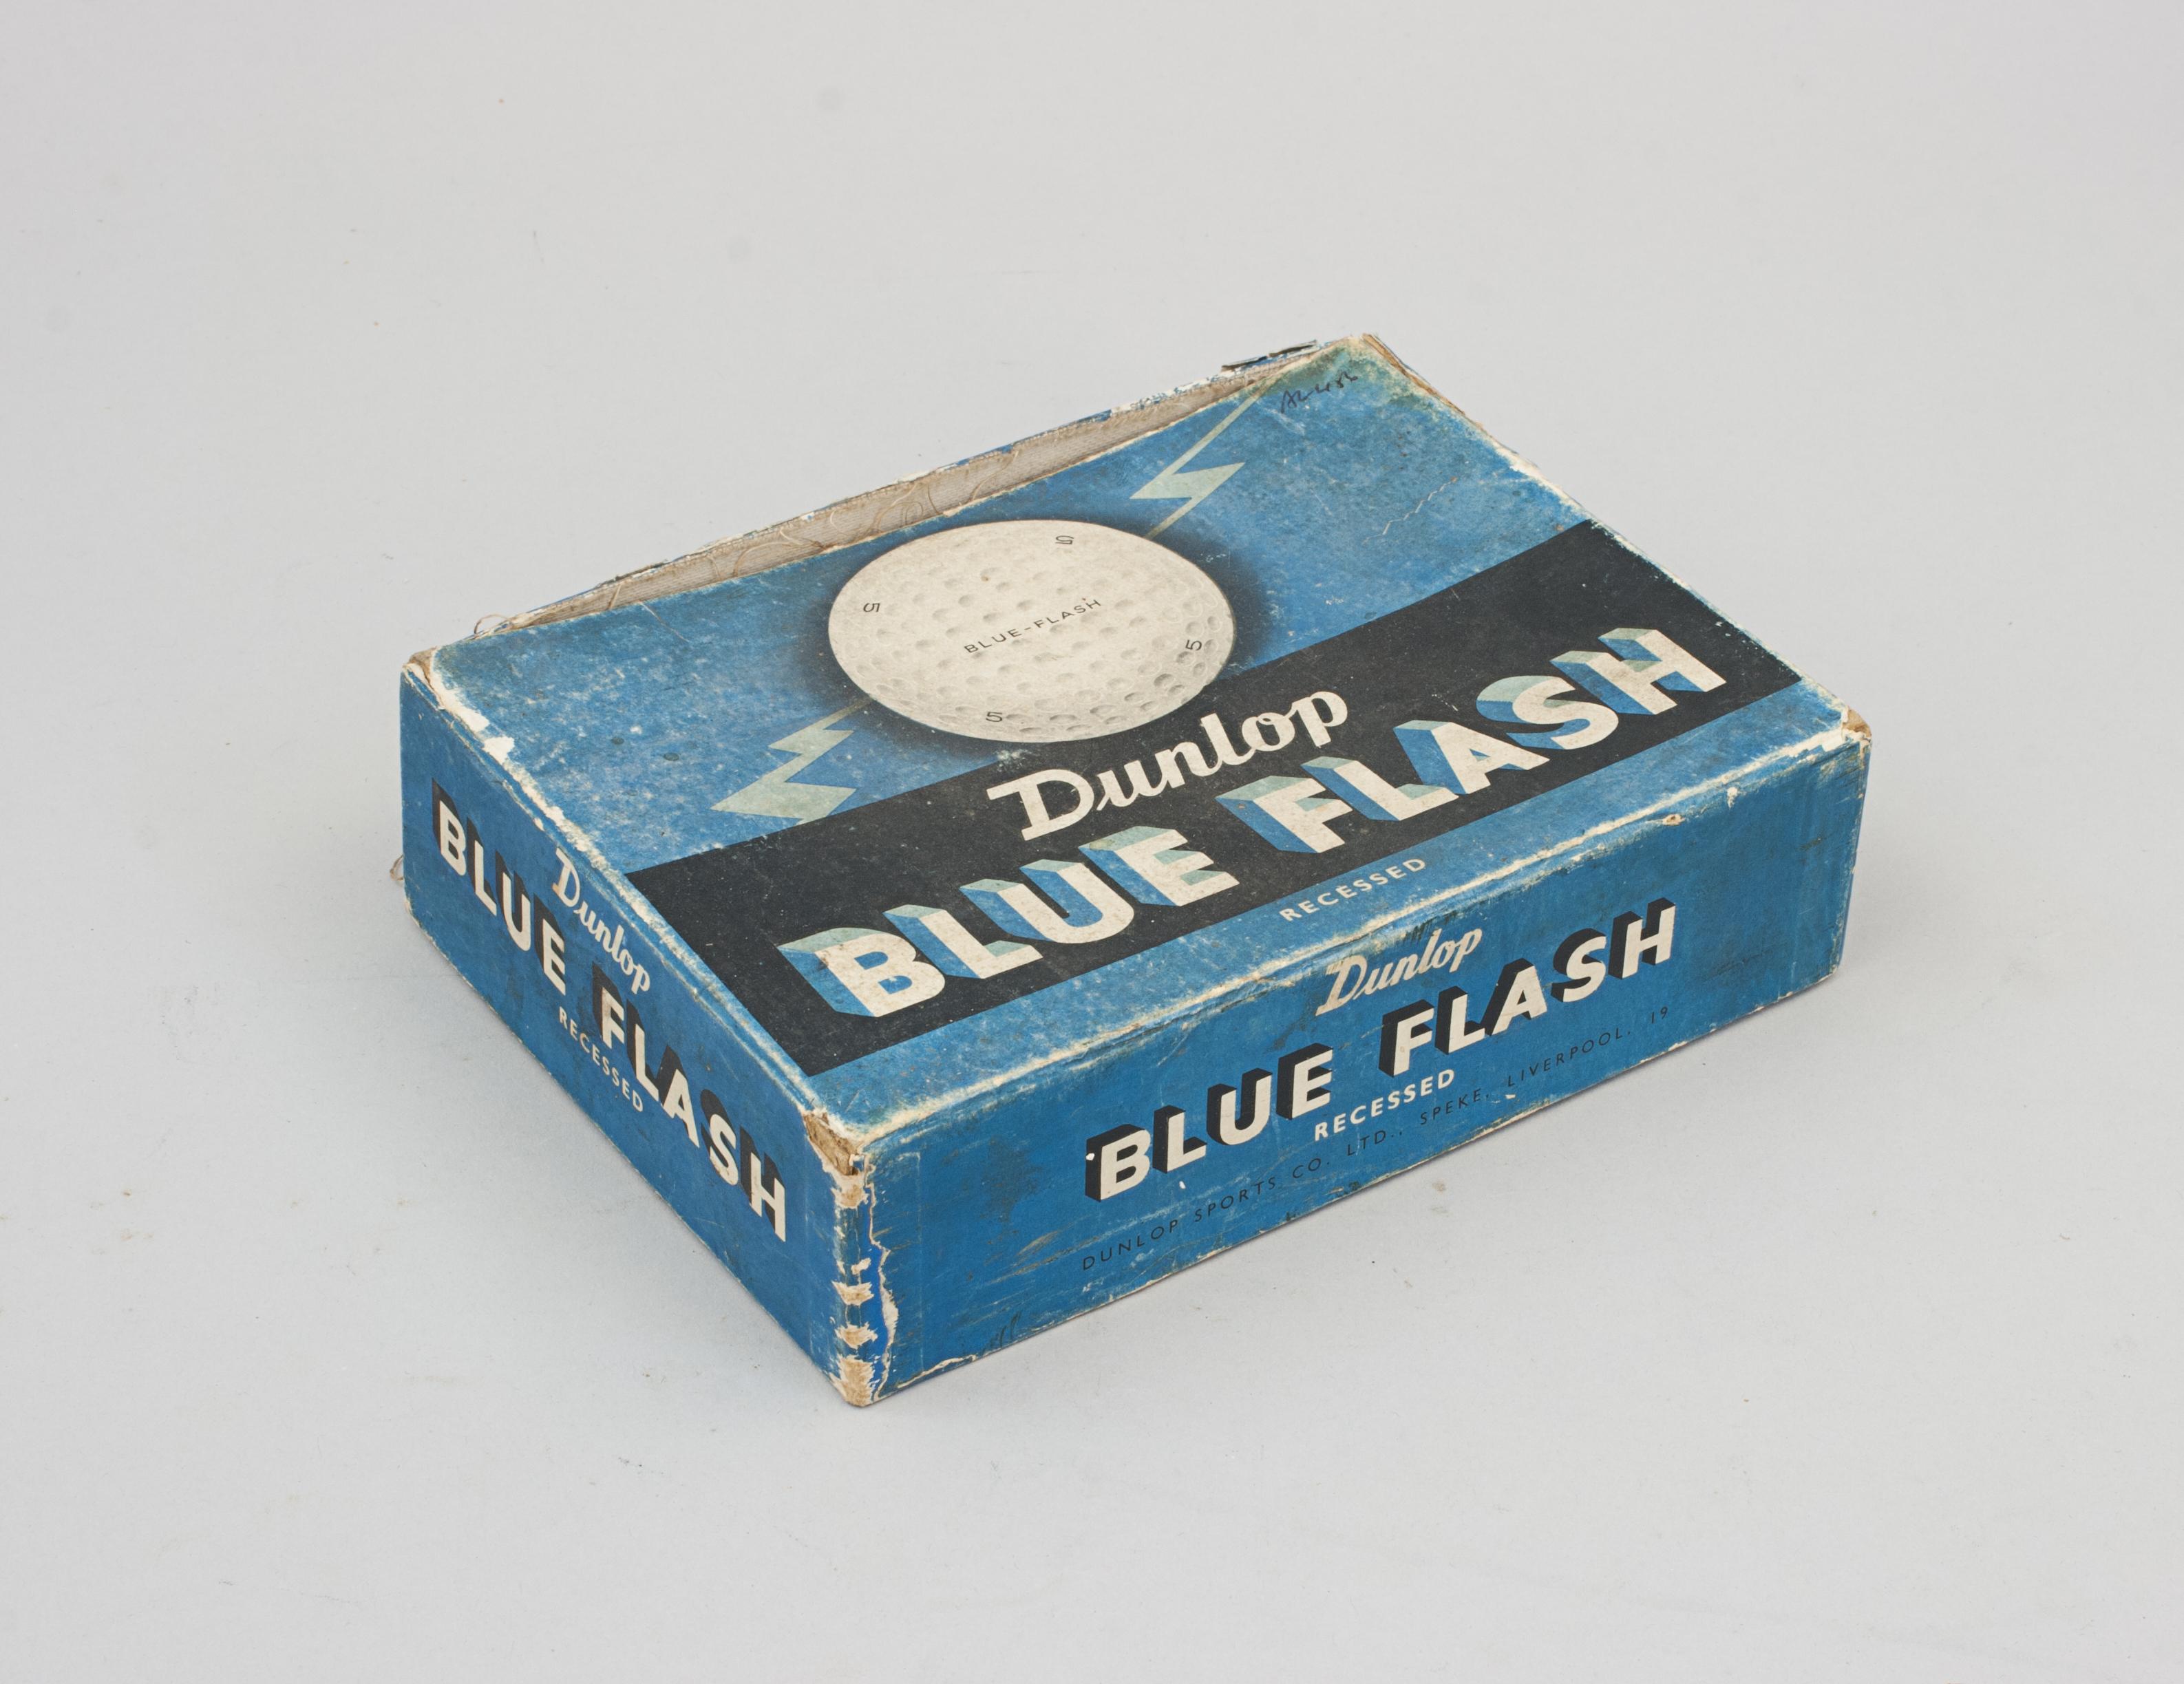 Paper Collection of 12 Original Golf Ball Boxes. Silver King, North Berwick etc. For Sale